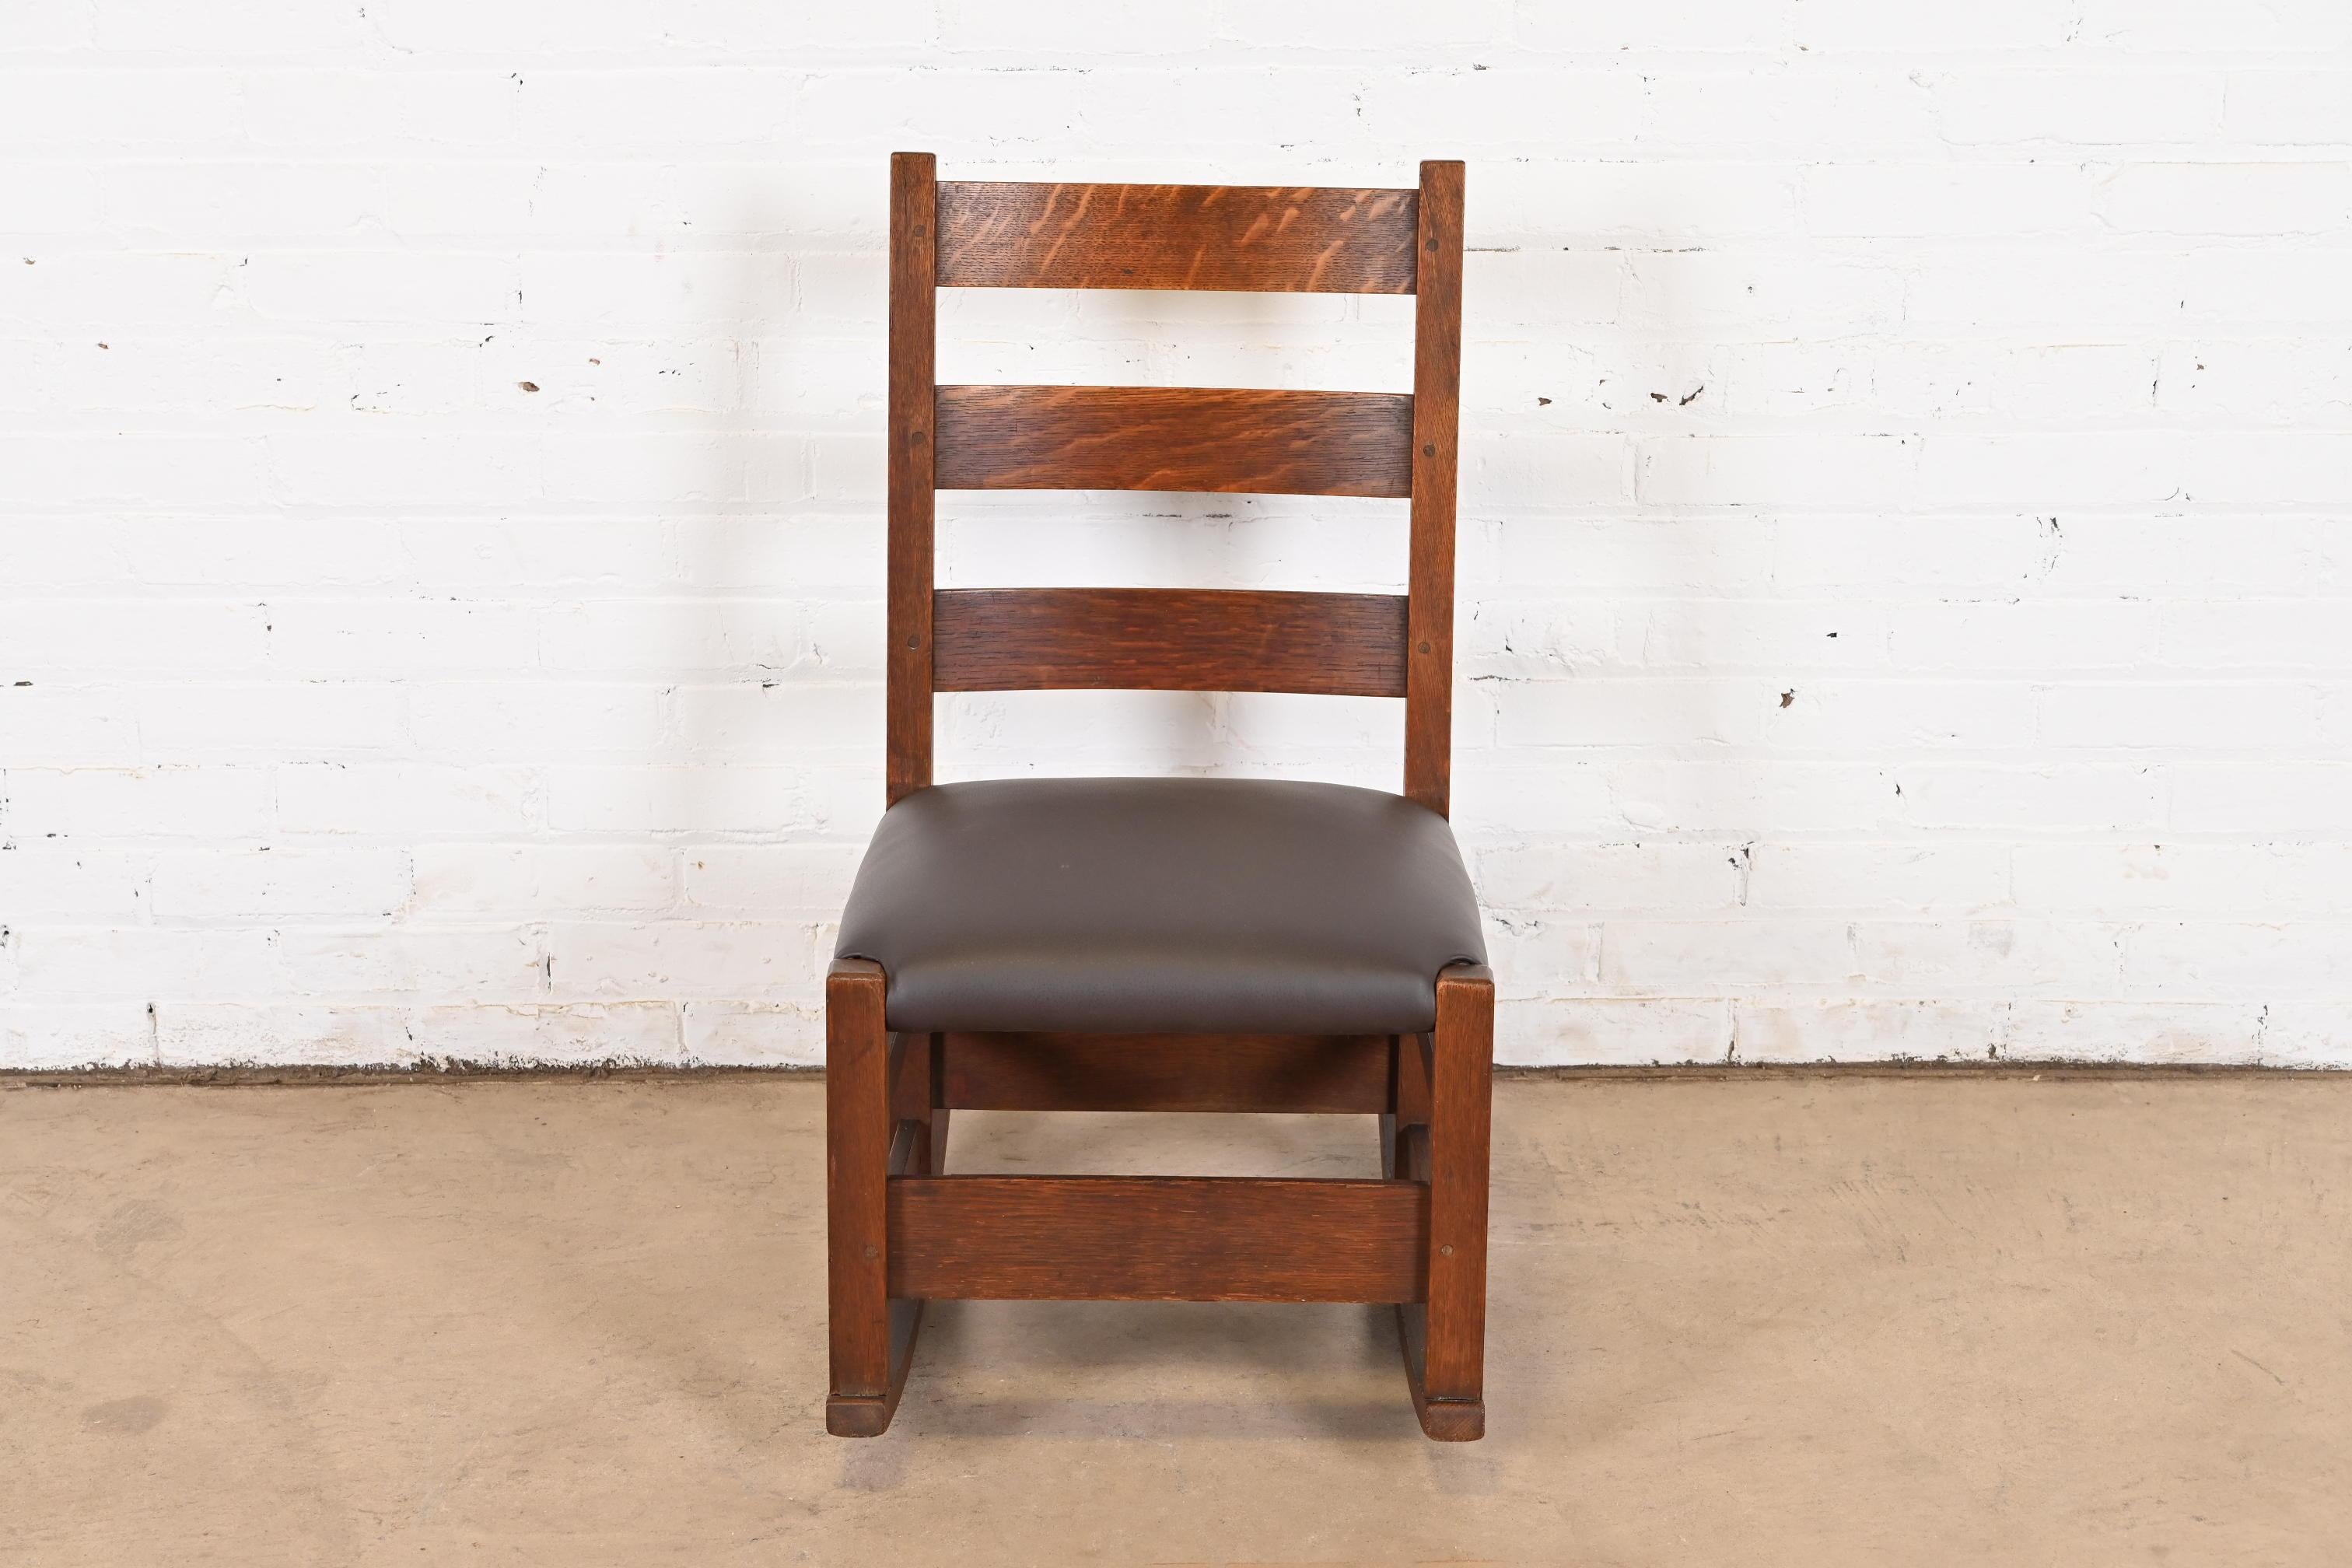 American Signed Gustav Stickley Antique Mission Oak Arts & Crafts Sewing Rocking Chair For Sale